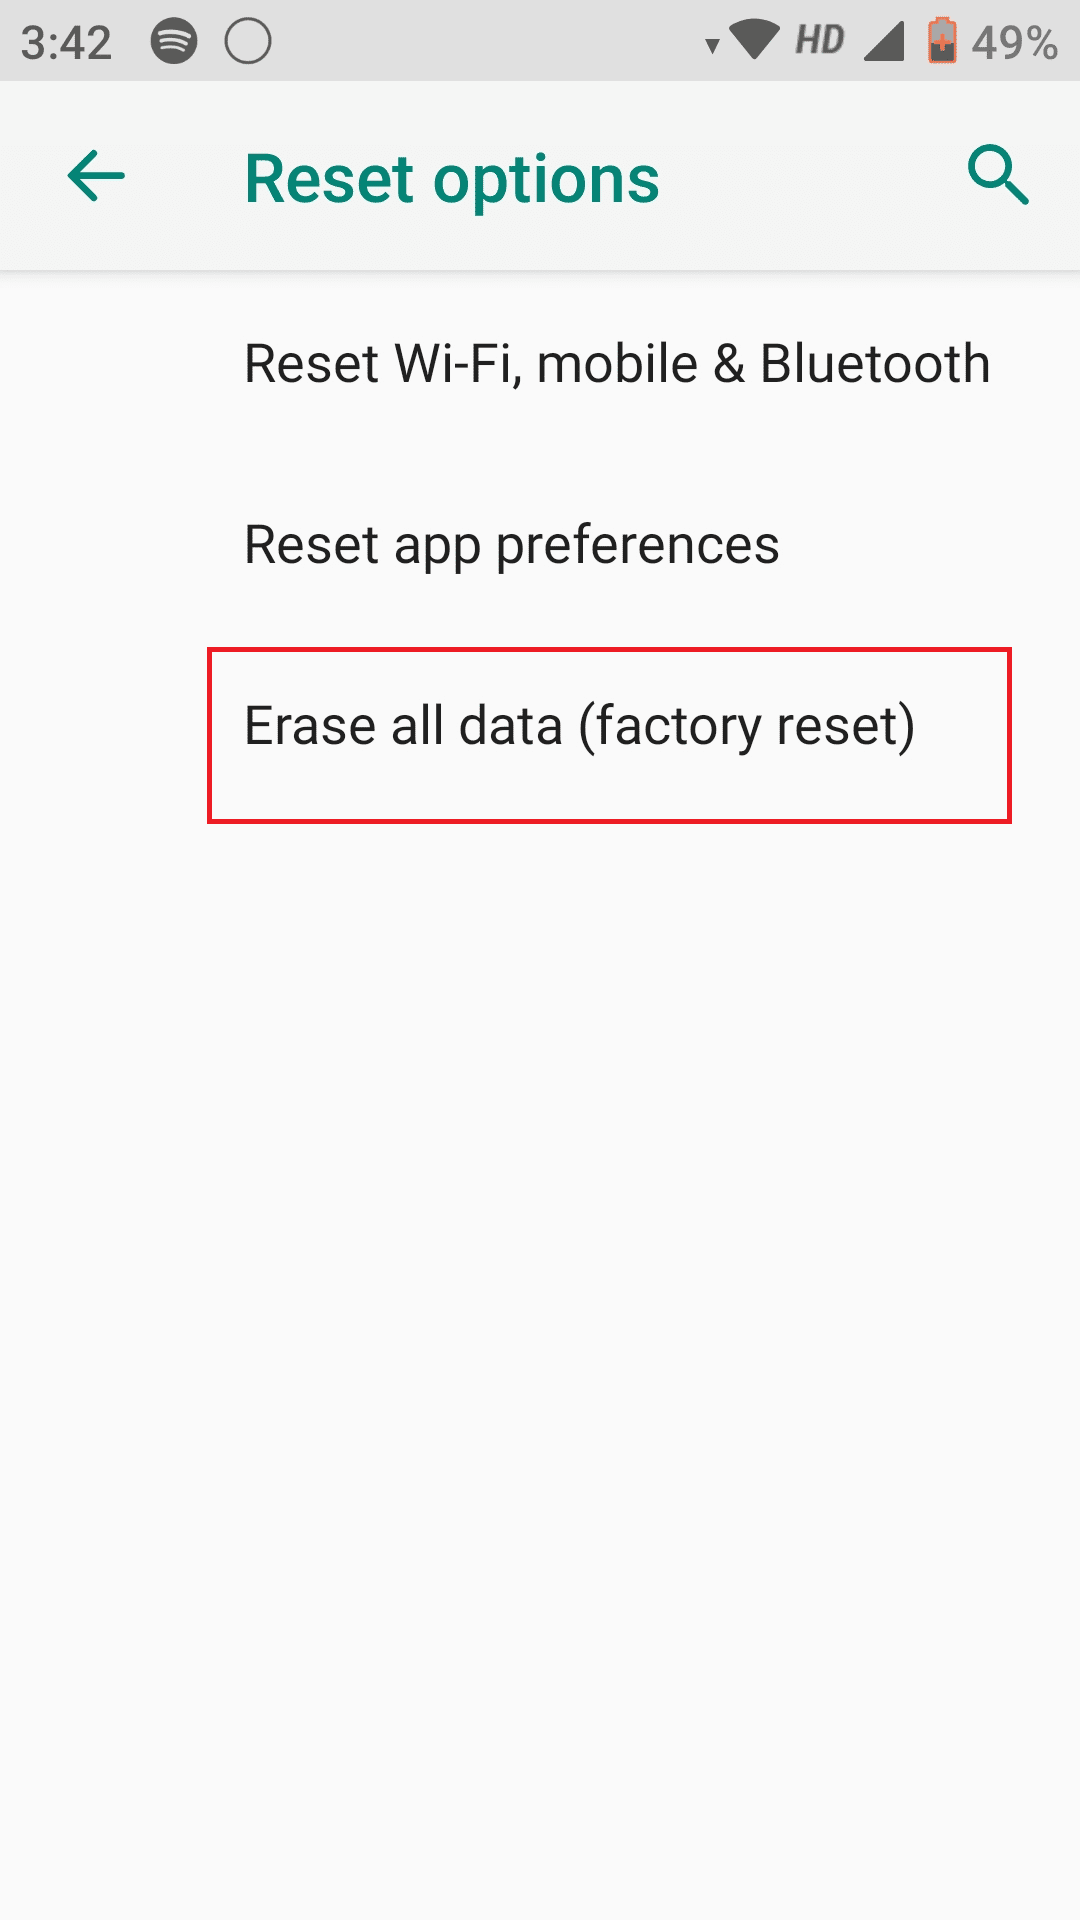 Tap on Erase all data